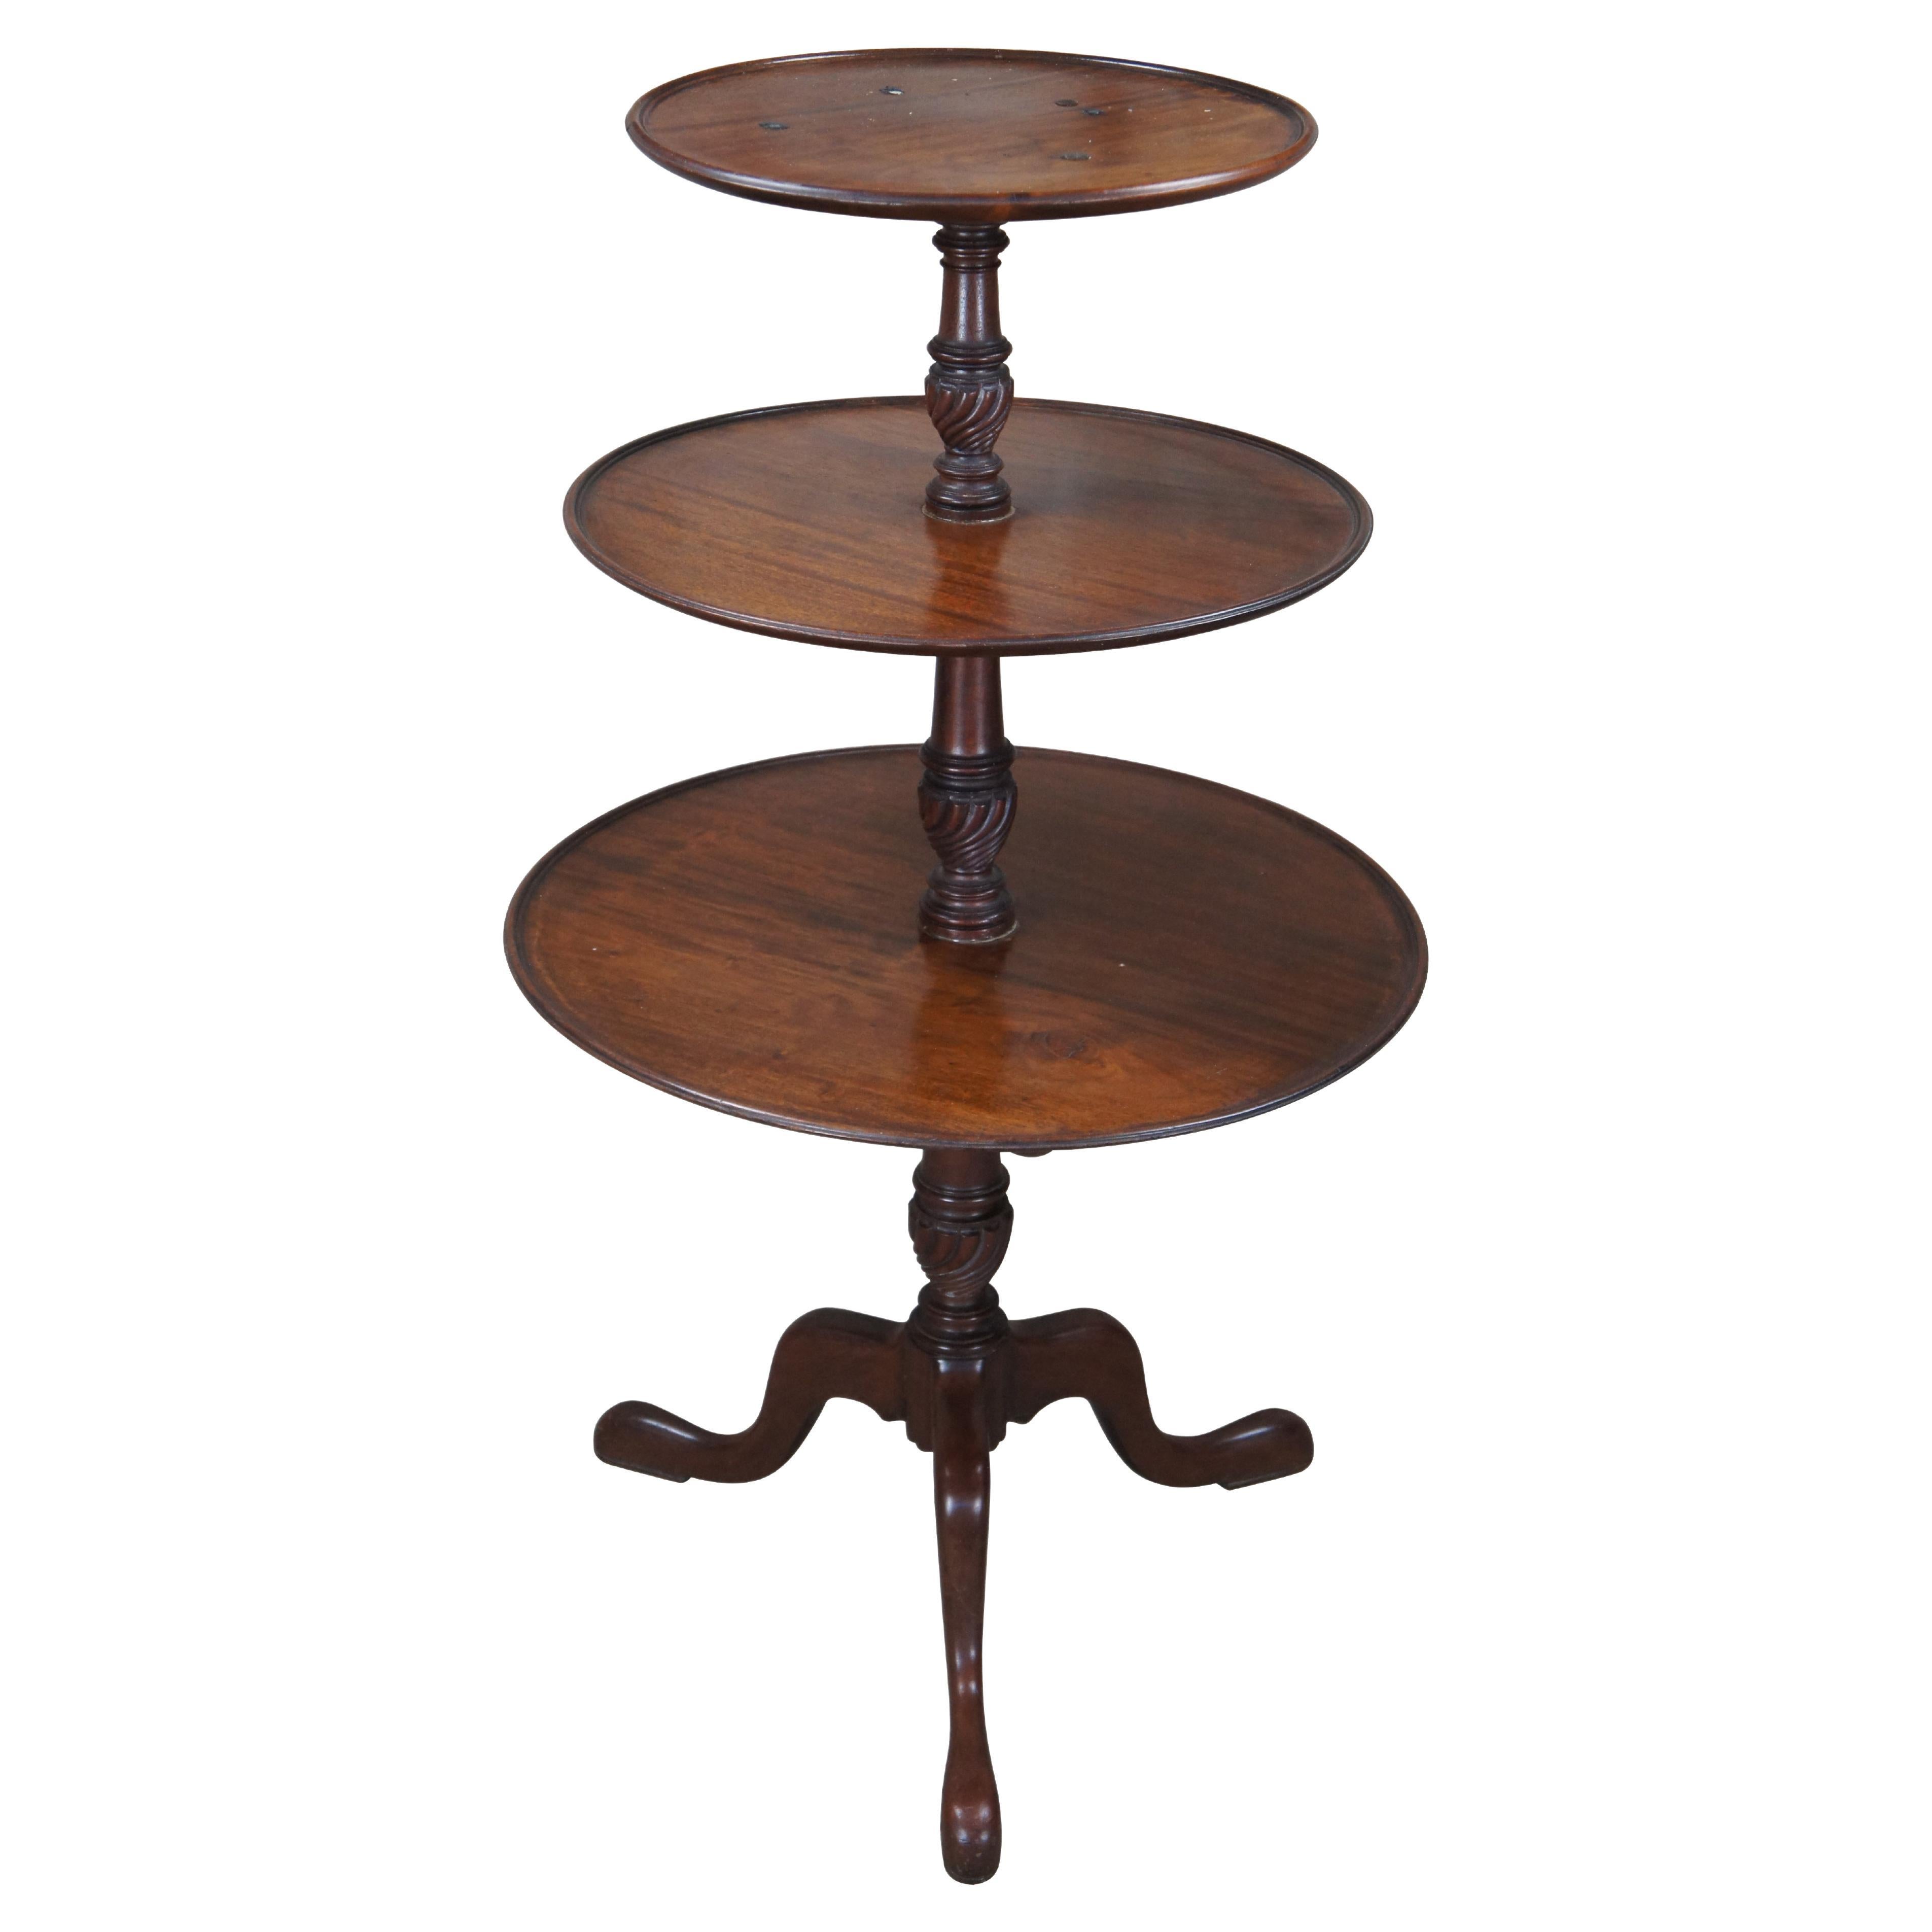 English Georgian Solid Mahogany 3 Tier Dumbwaiter Table Butler Pedestal Table For Sale